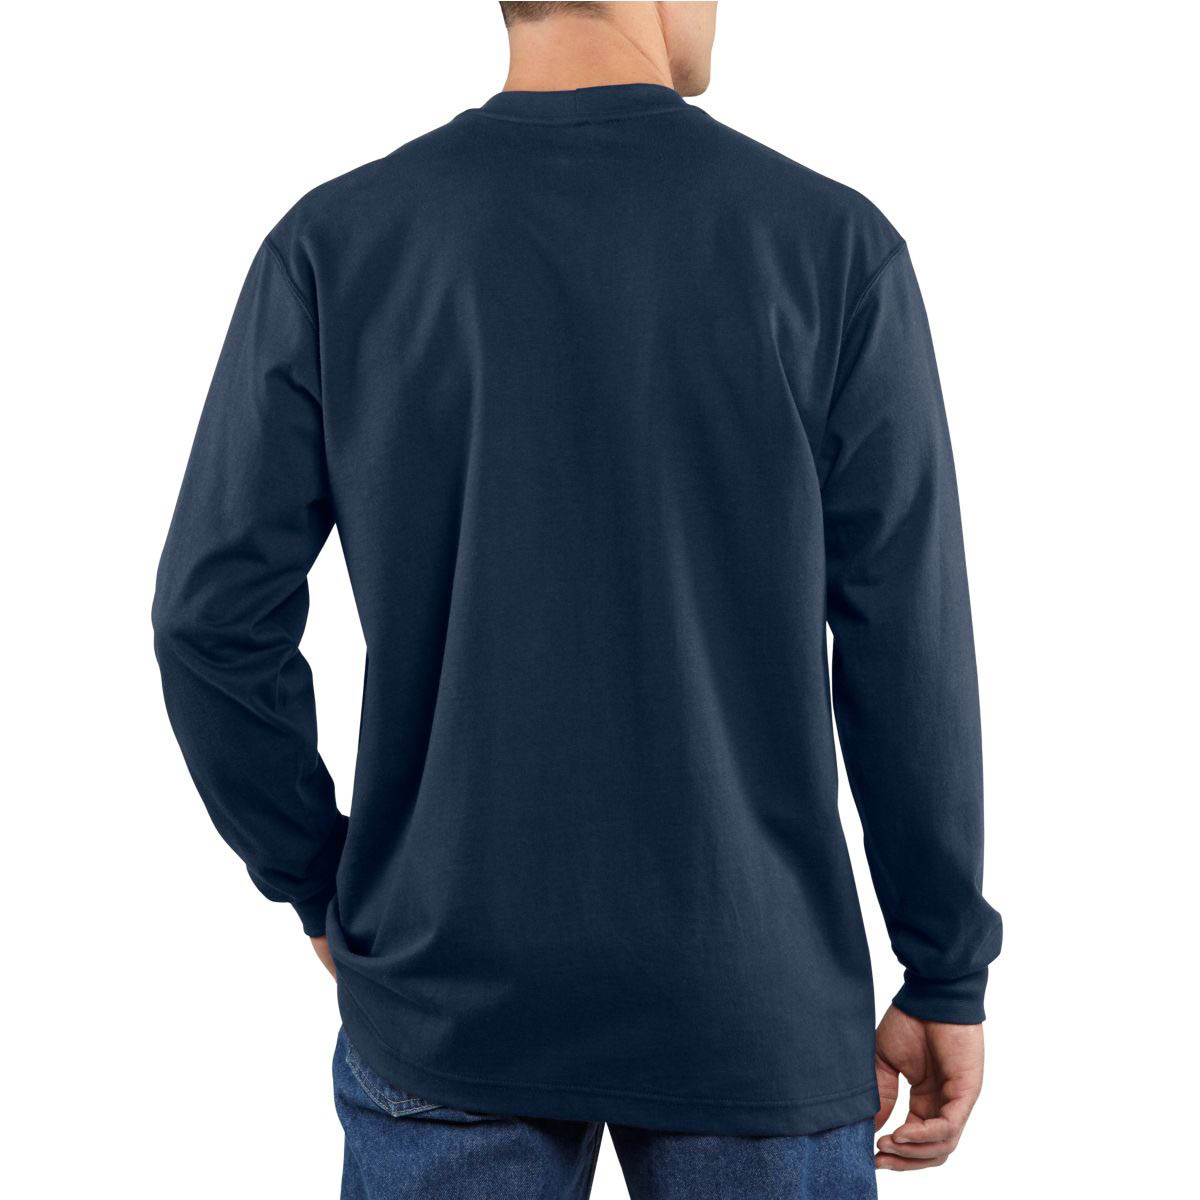 Carhartt Mens Flame Resistant Force Cotton Long Sleeve T Shirt